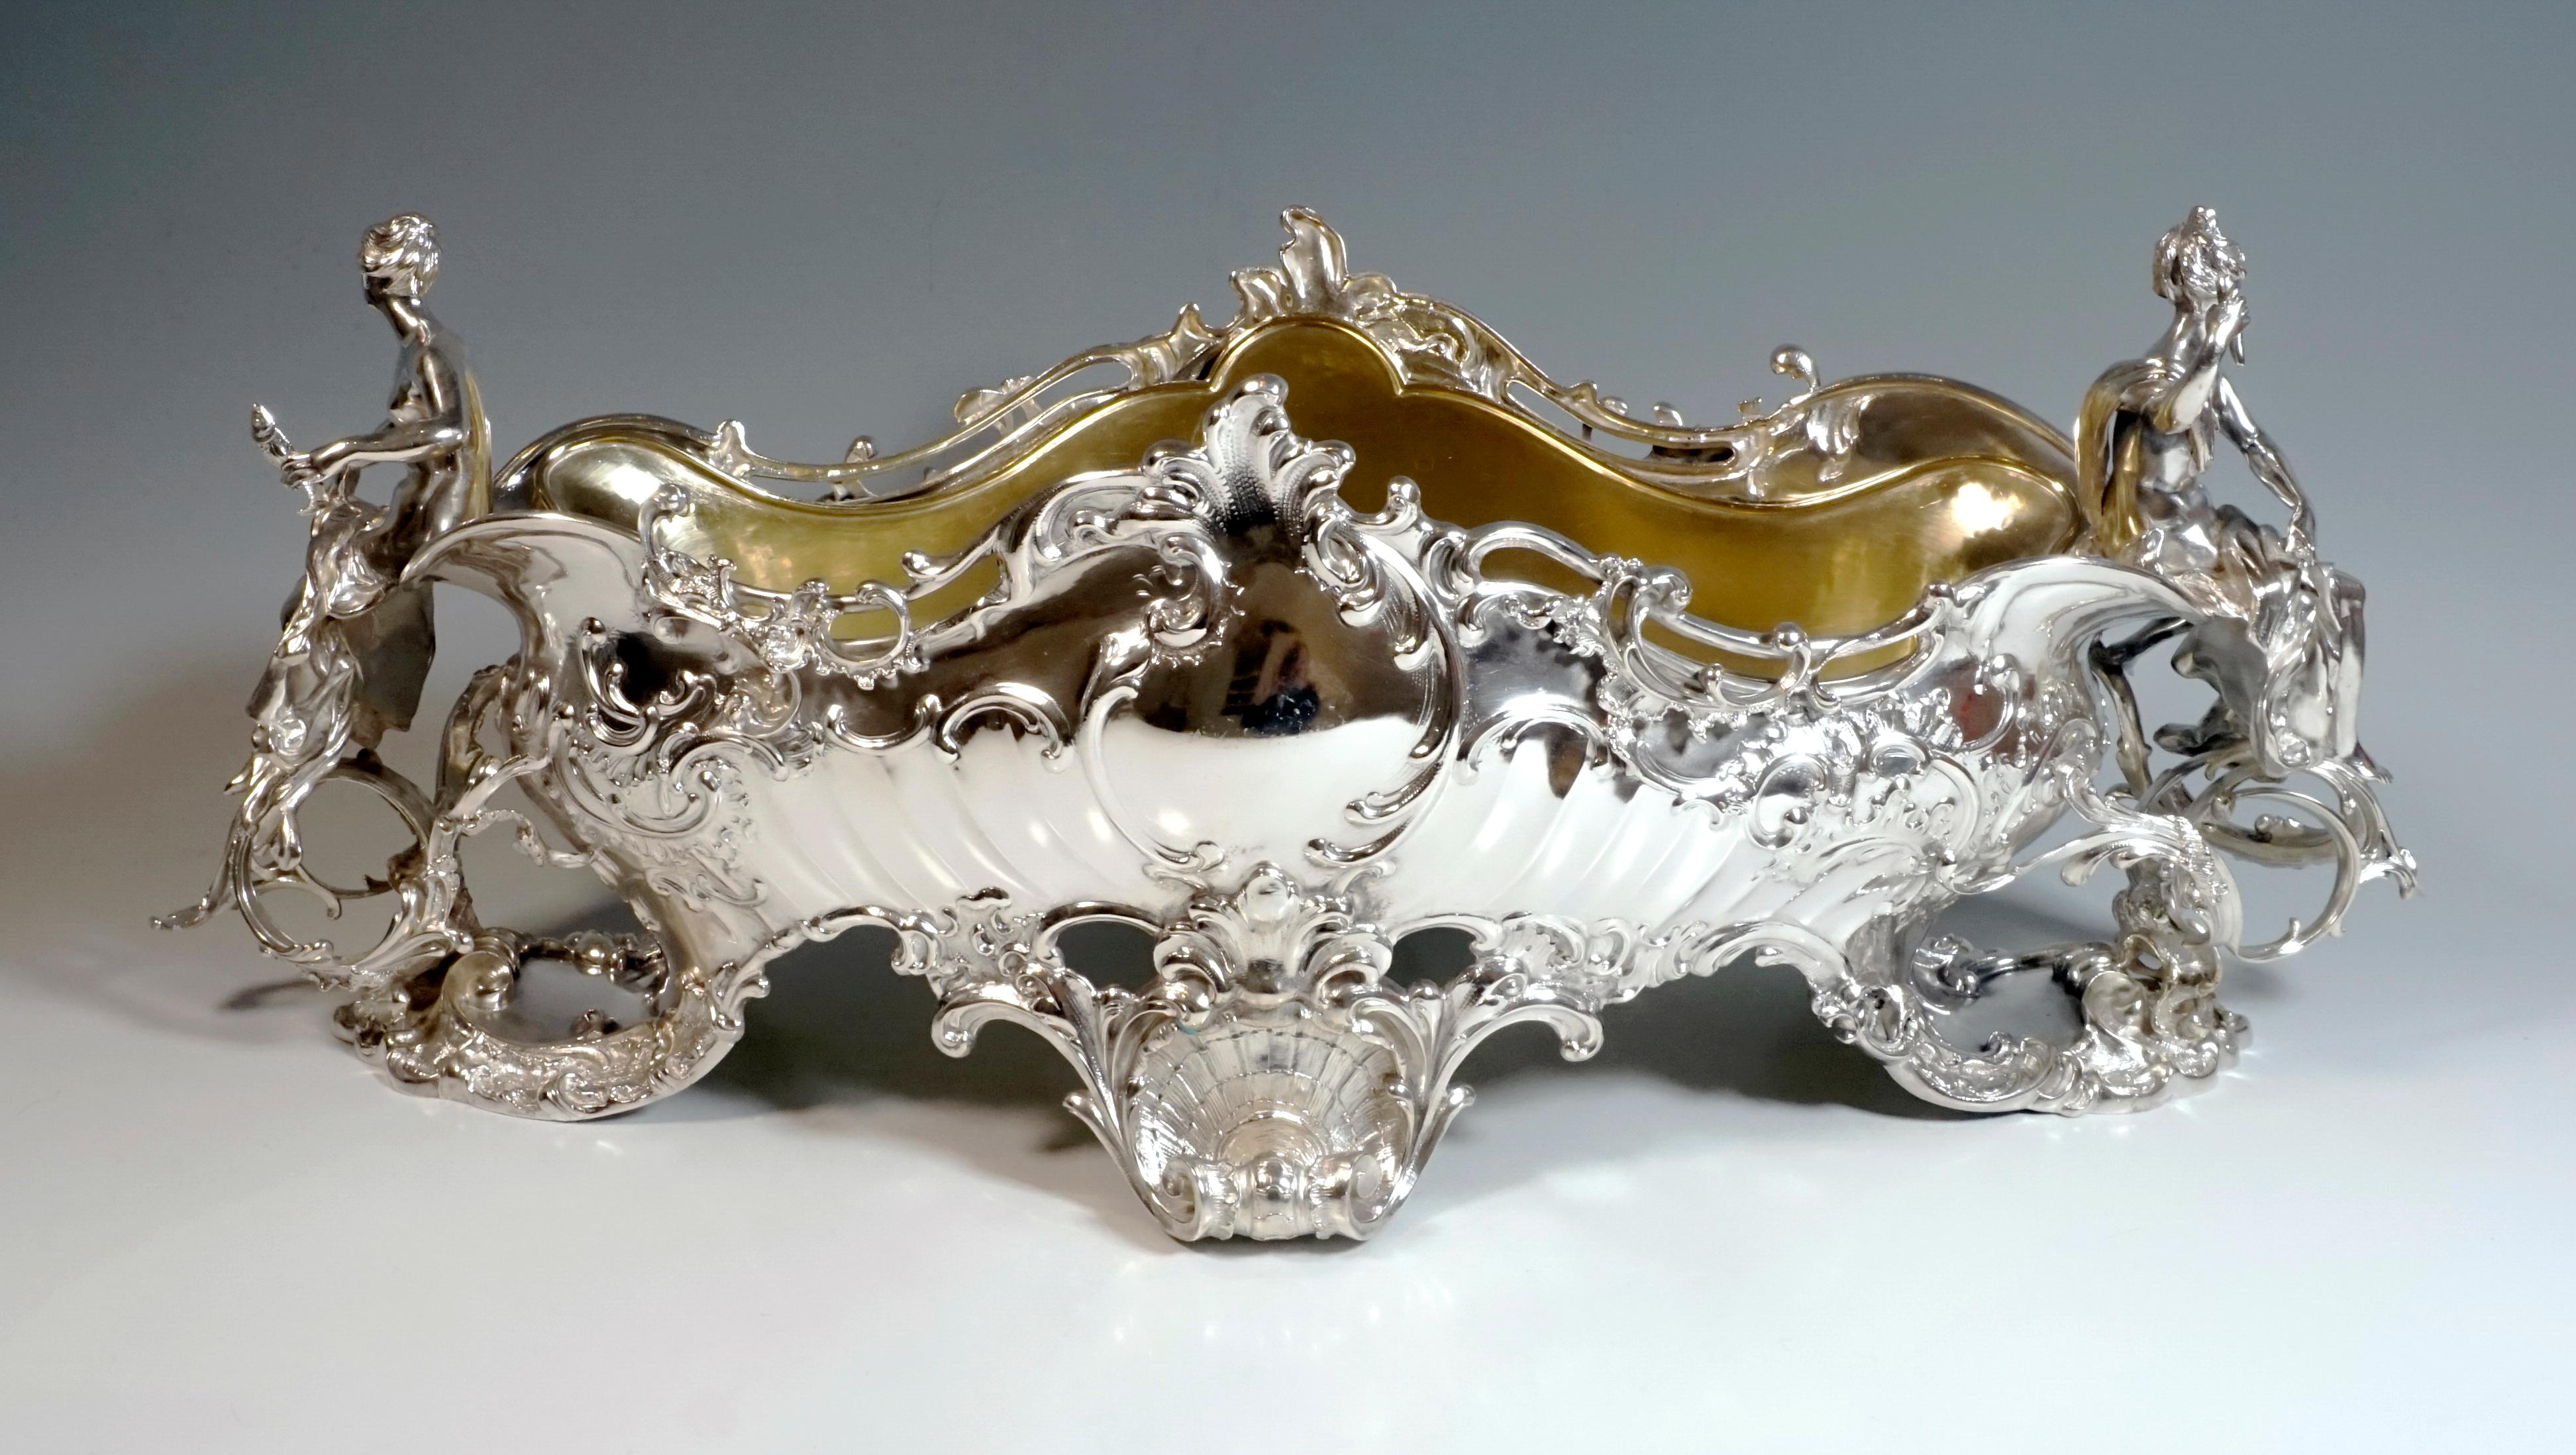 Large, elaborately designed silver centerpiece on an oval ground plan, the cambered, curved walls with ample rocaille decoration, on the long sides large cartouches in the middle over a slightly flared rocaille and volute foot with shell embossing.